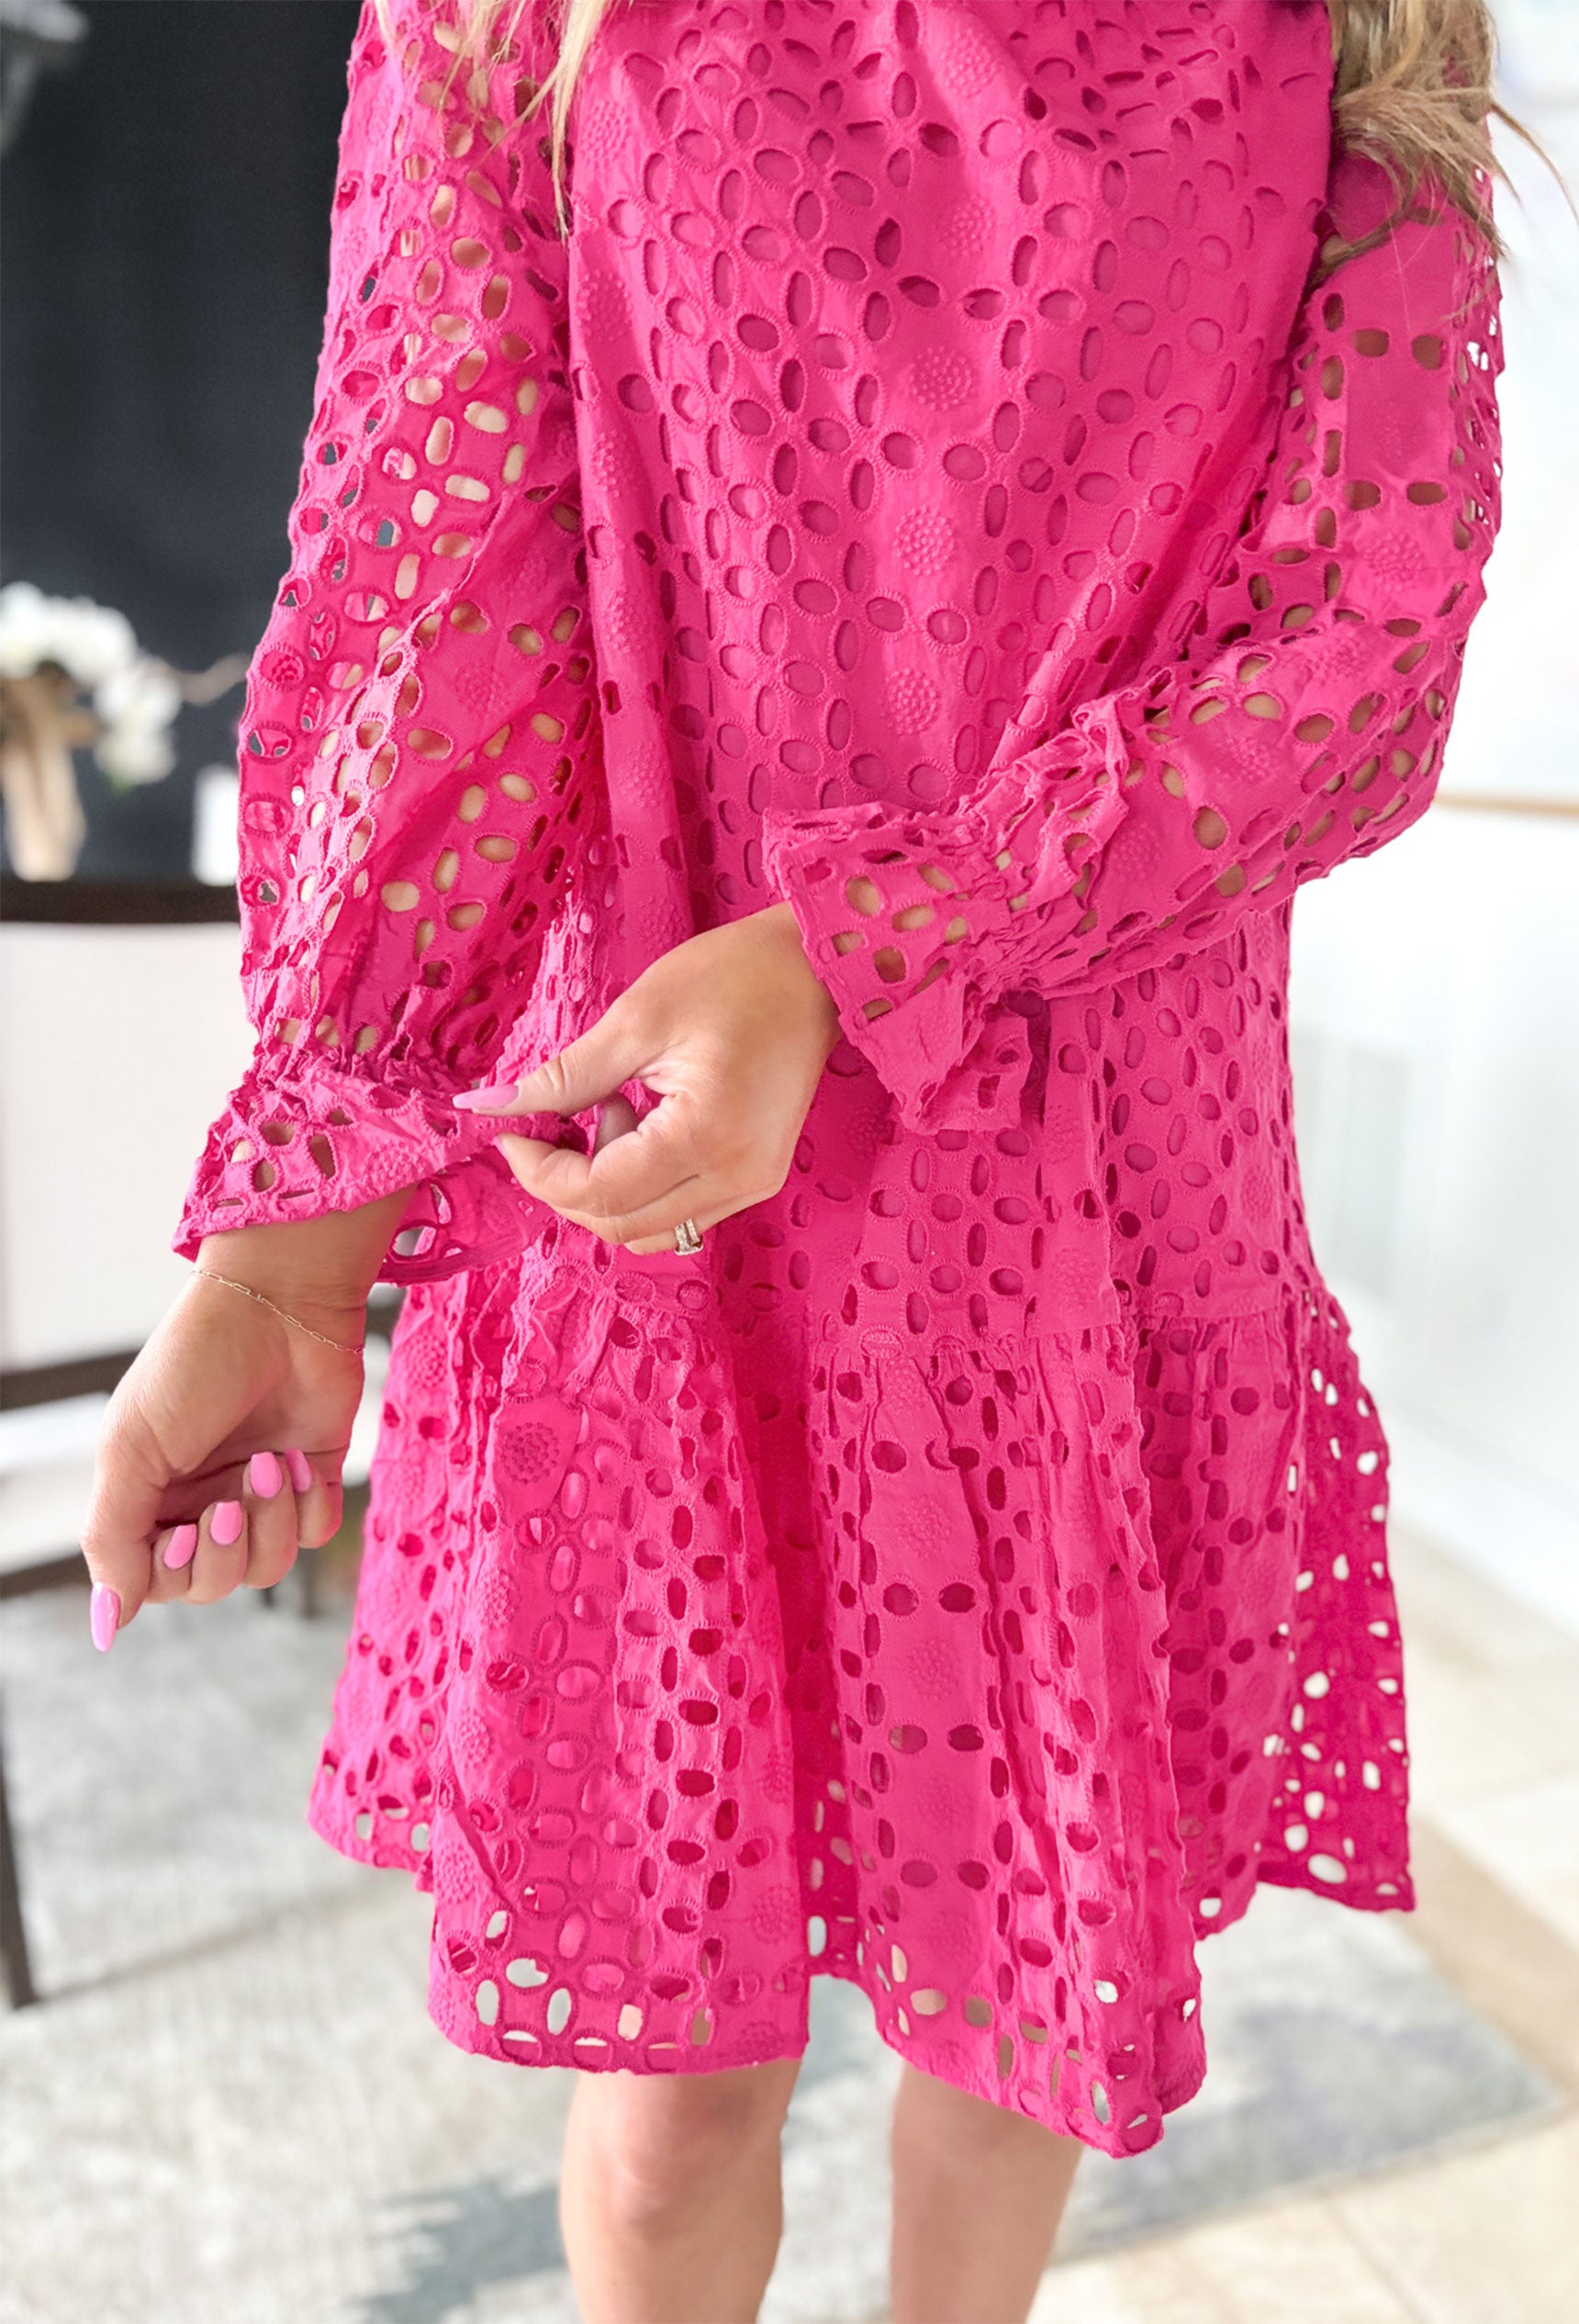 What A Shame Dress, hot pink eyelet lace long sleeve dress with mock neck and cinching at the wrists with ruffle detailing